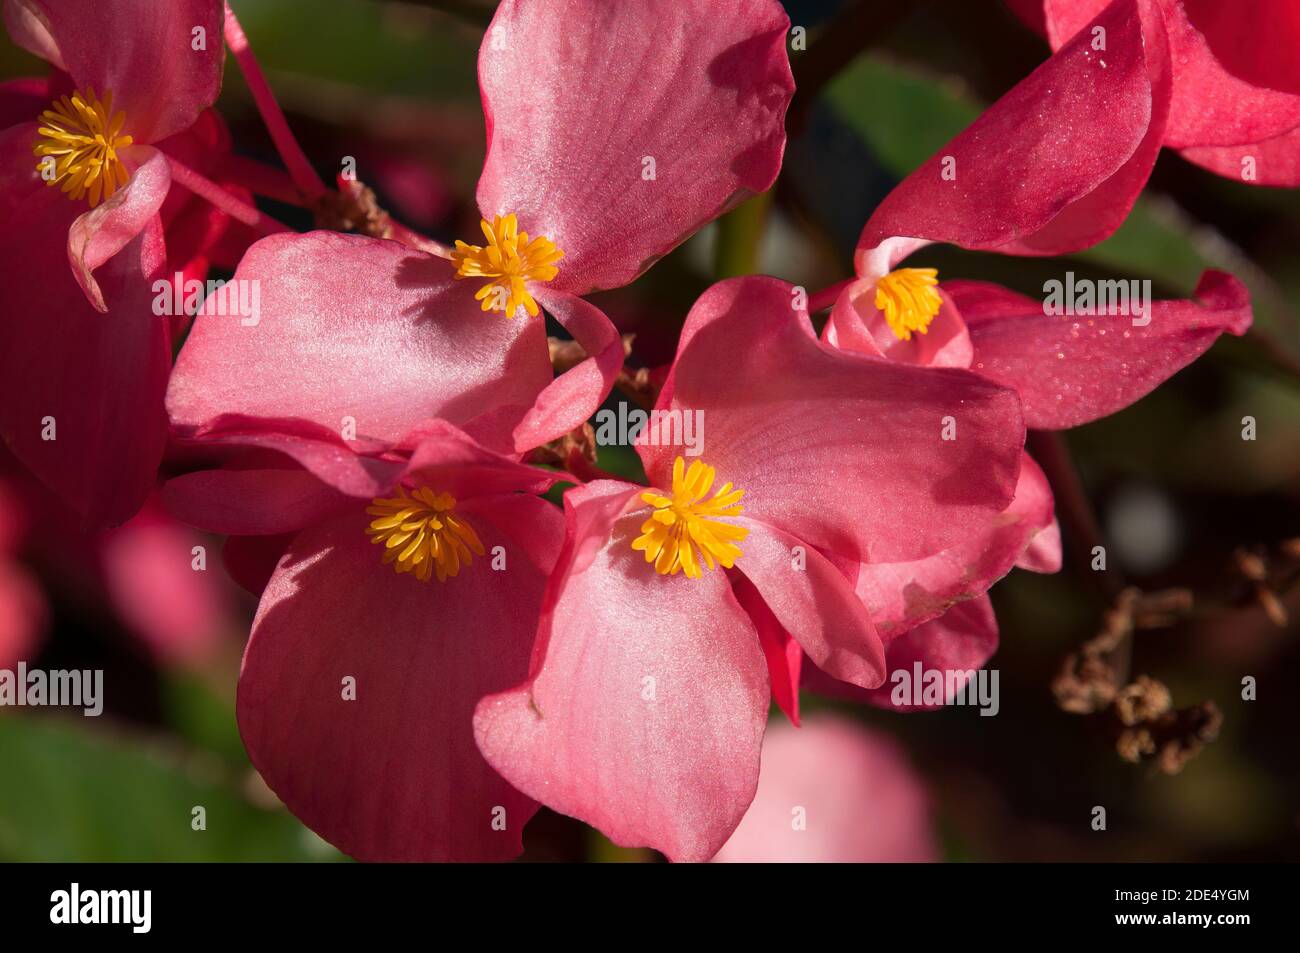 Sydney Australia, close-up of pink waxy begonia flowers on a sunny day Stock Photo